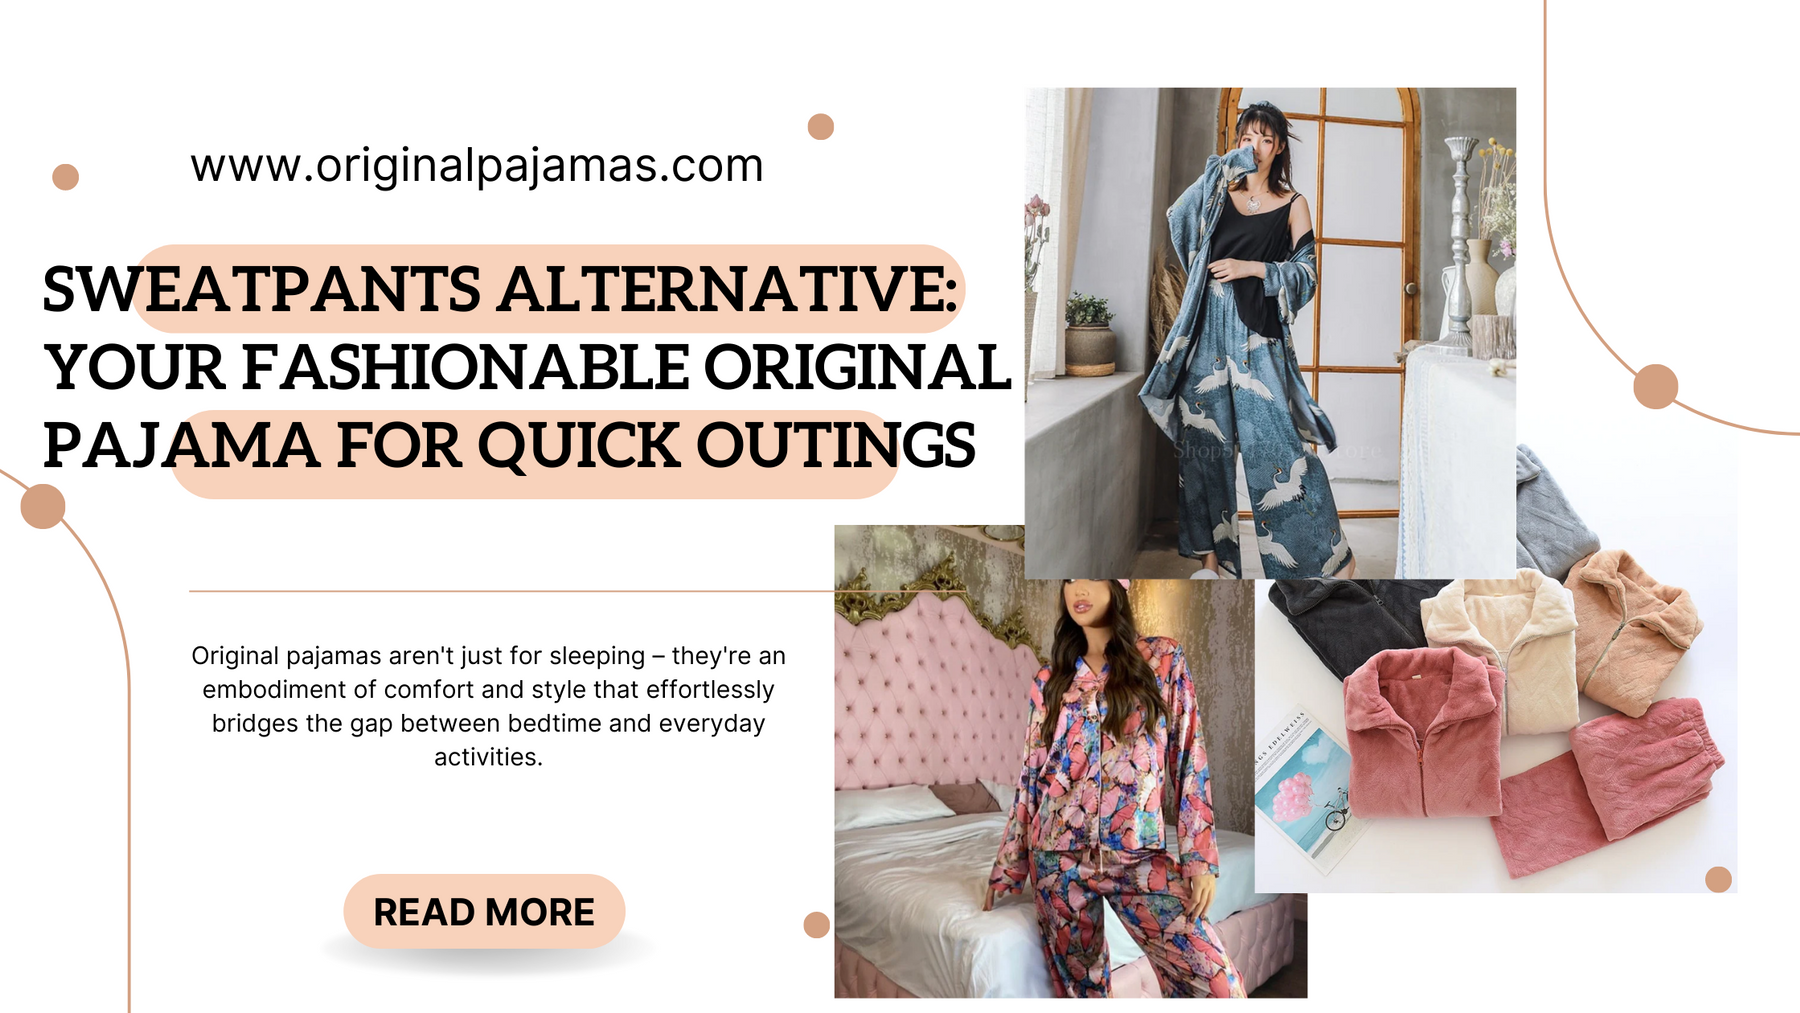 Sweatpants Alternative: Your Fashionable Original Pajama for Quick Outings